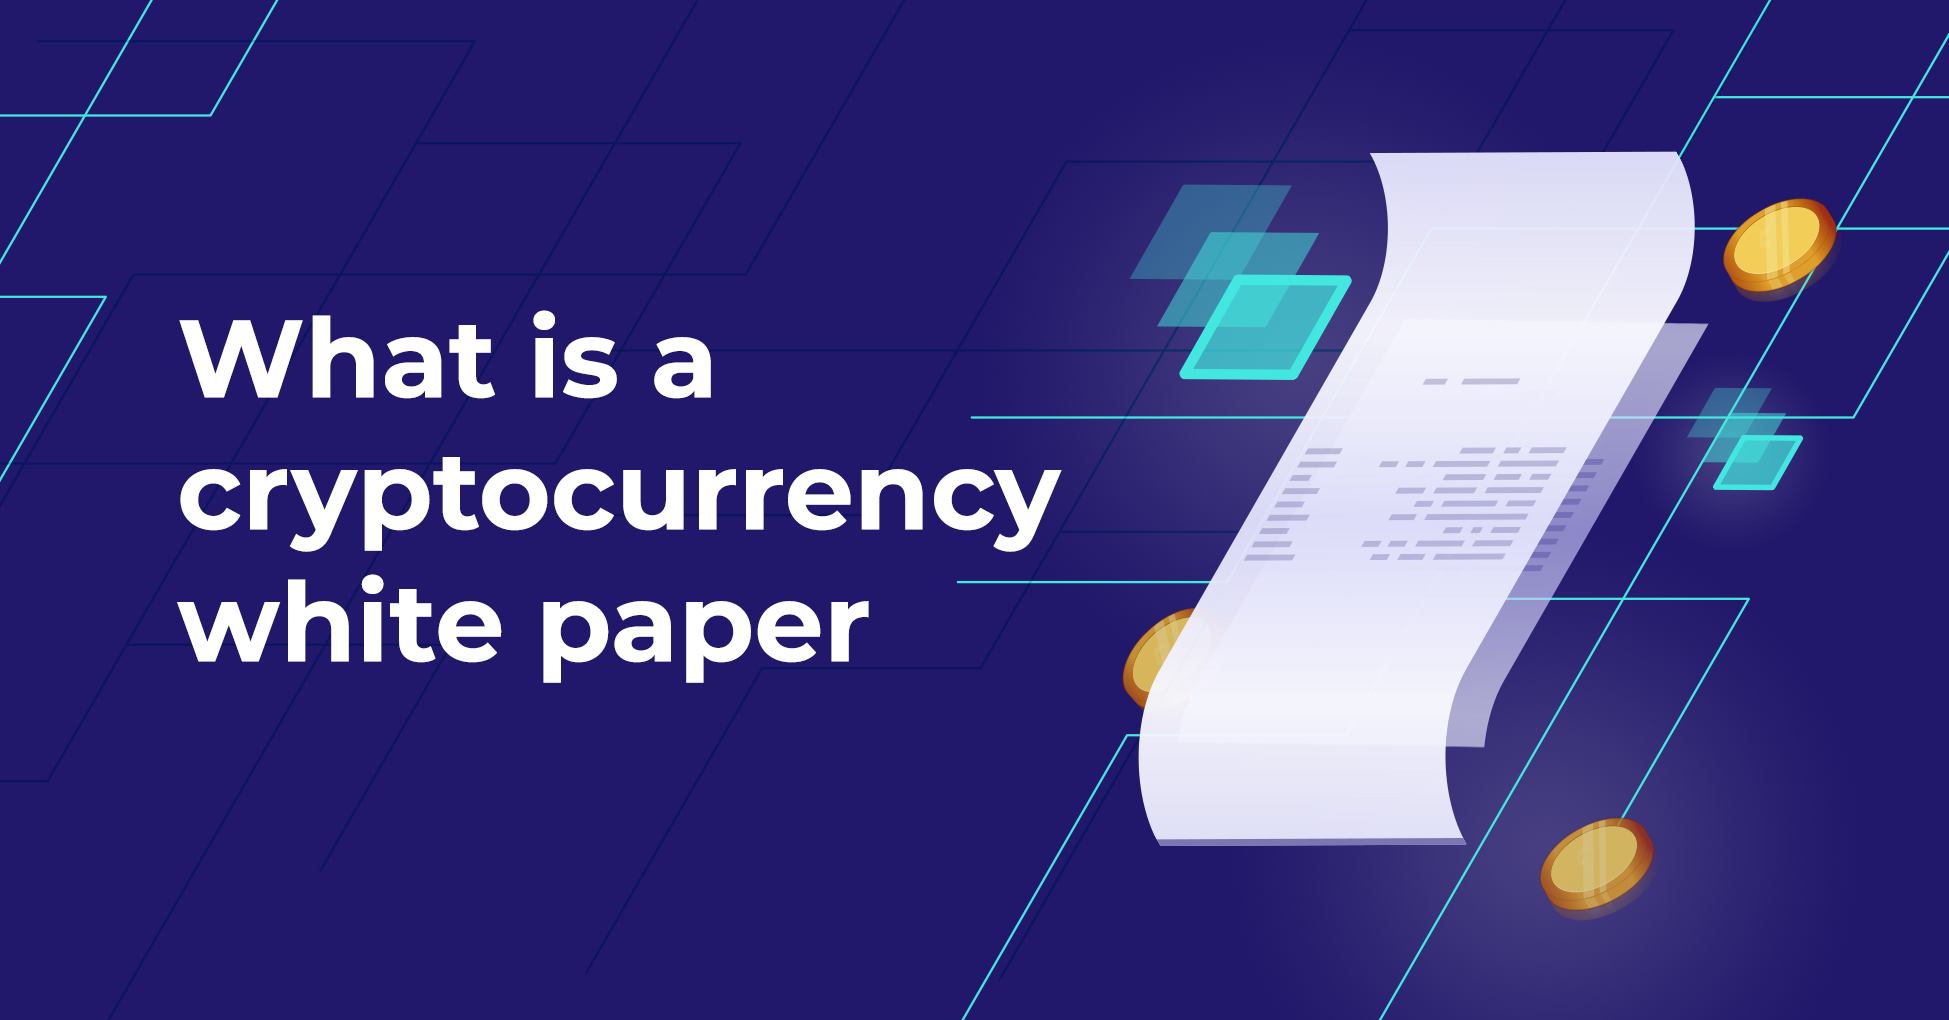 A step-by-step guide to understanding a crypto whitepaper